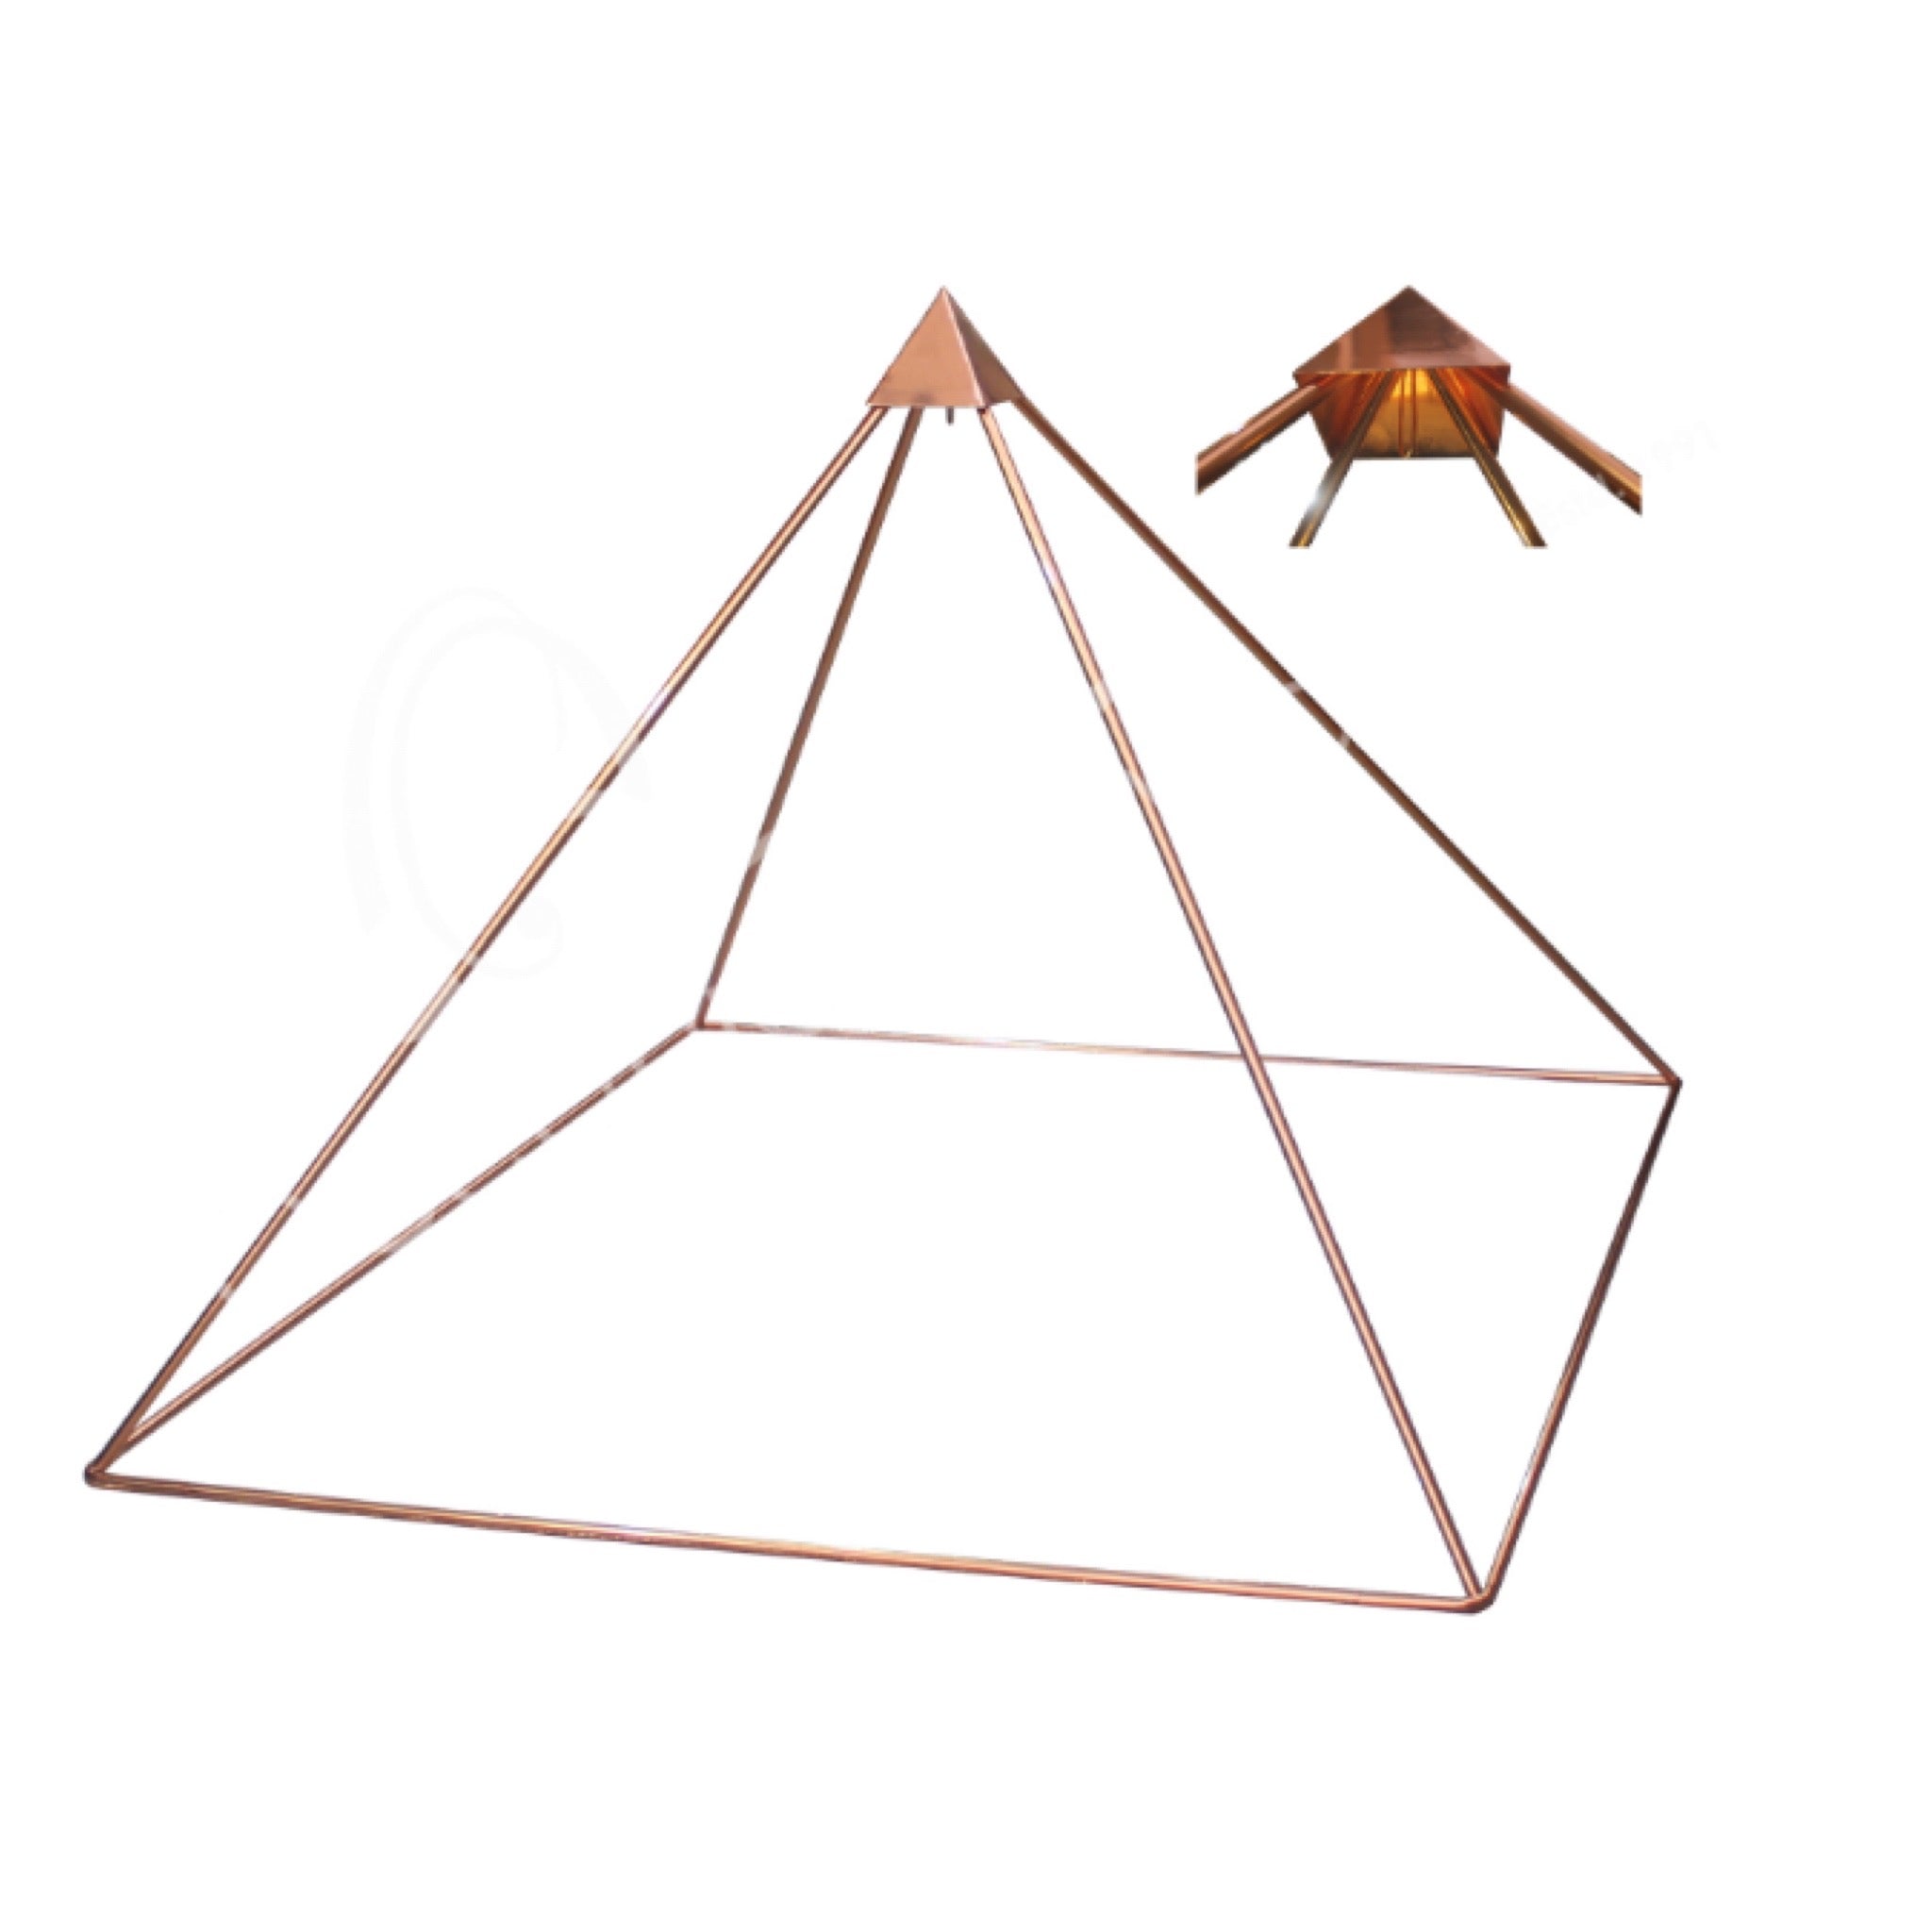 79in Copper Pyramid For Meditation - The Great Pyramid Of Meditation,  Meditation Accessory, Healing Tool